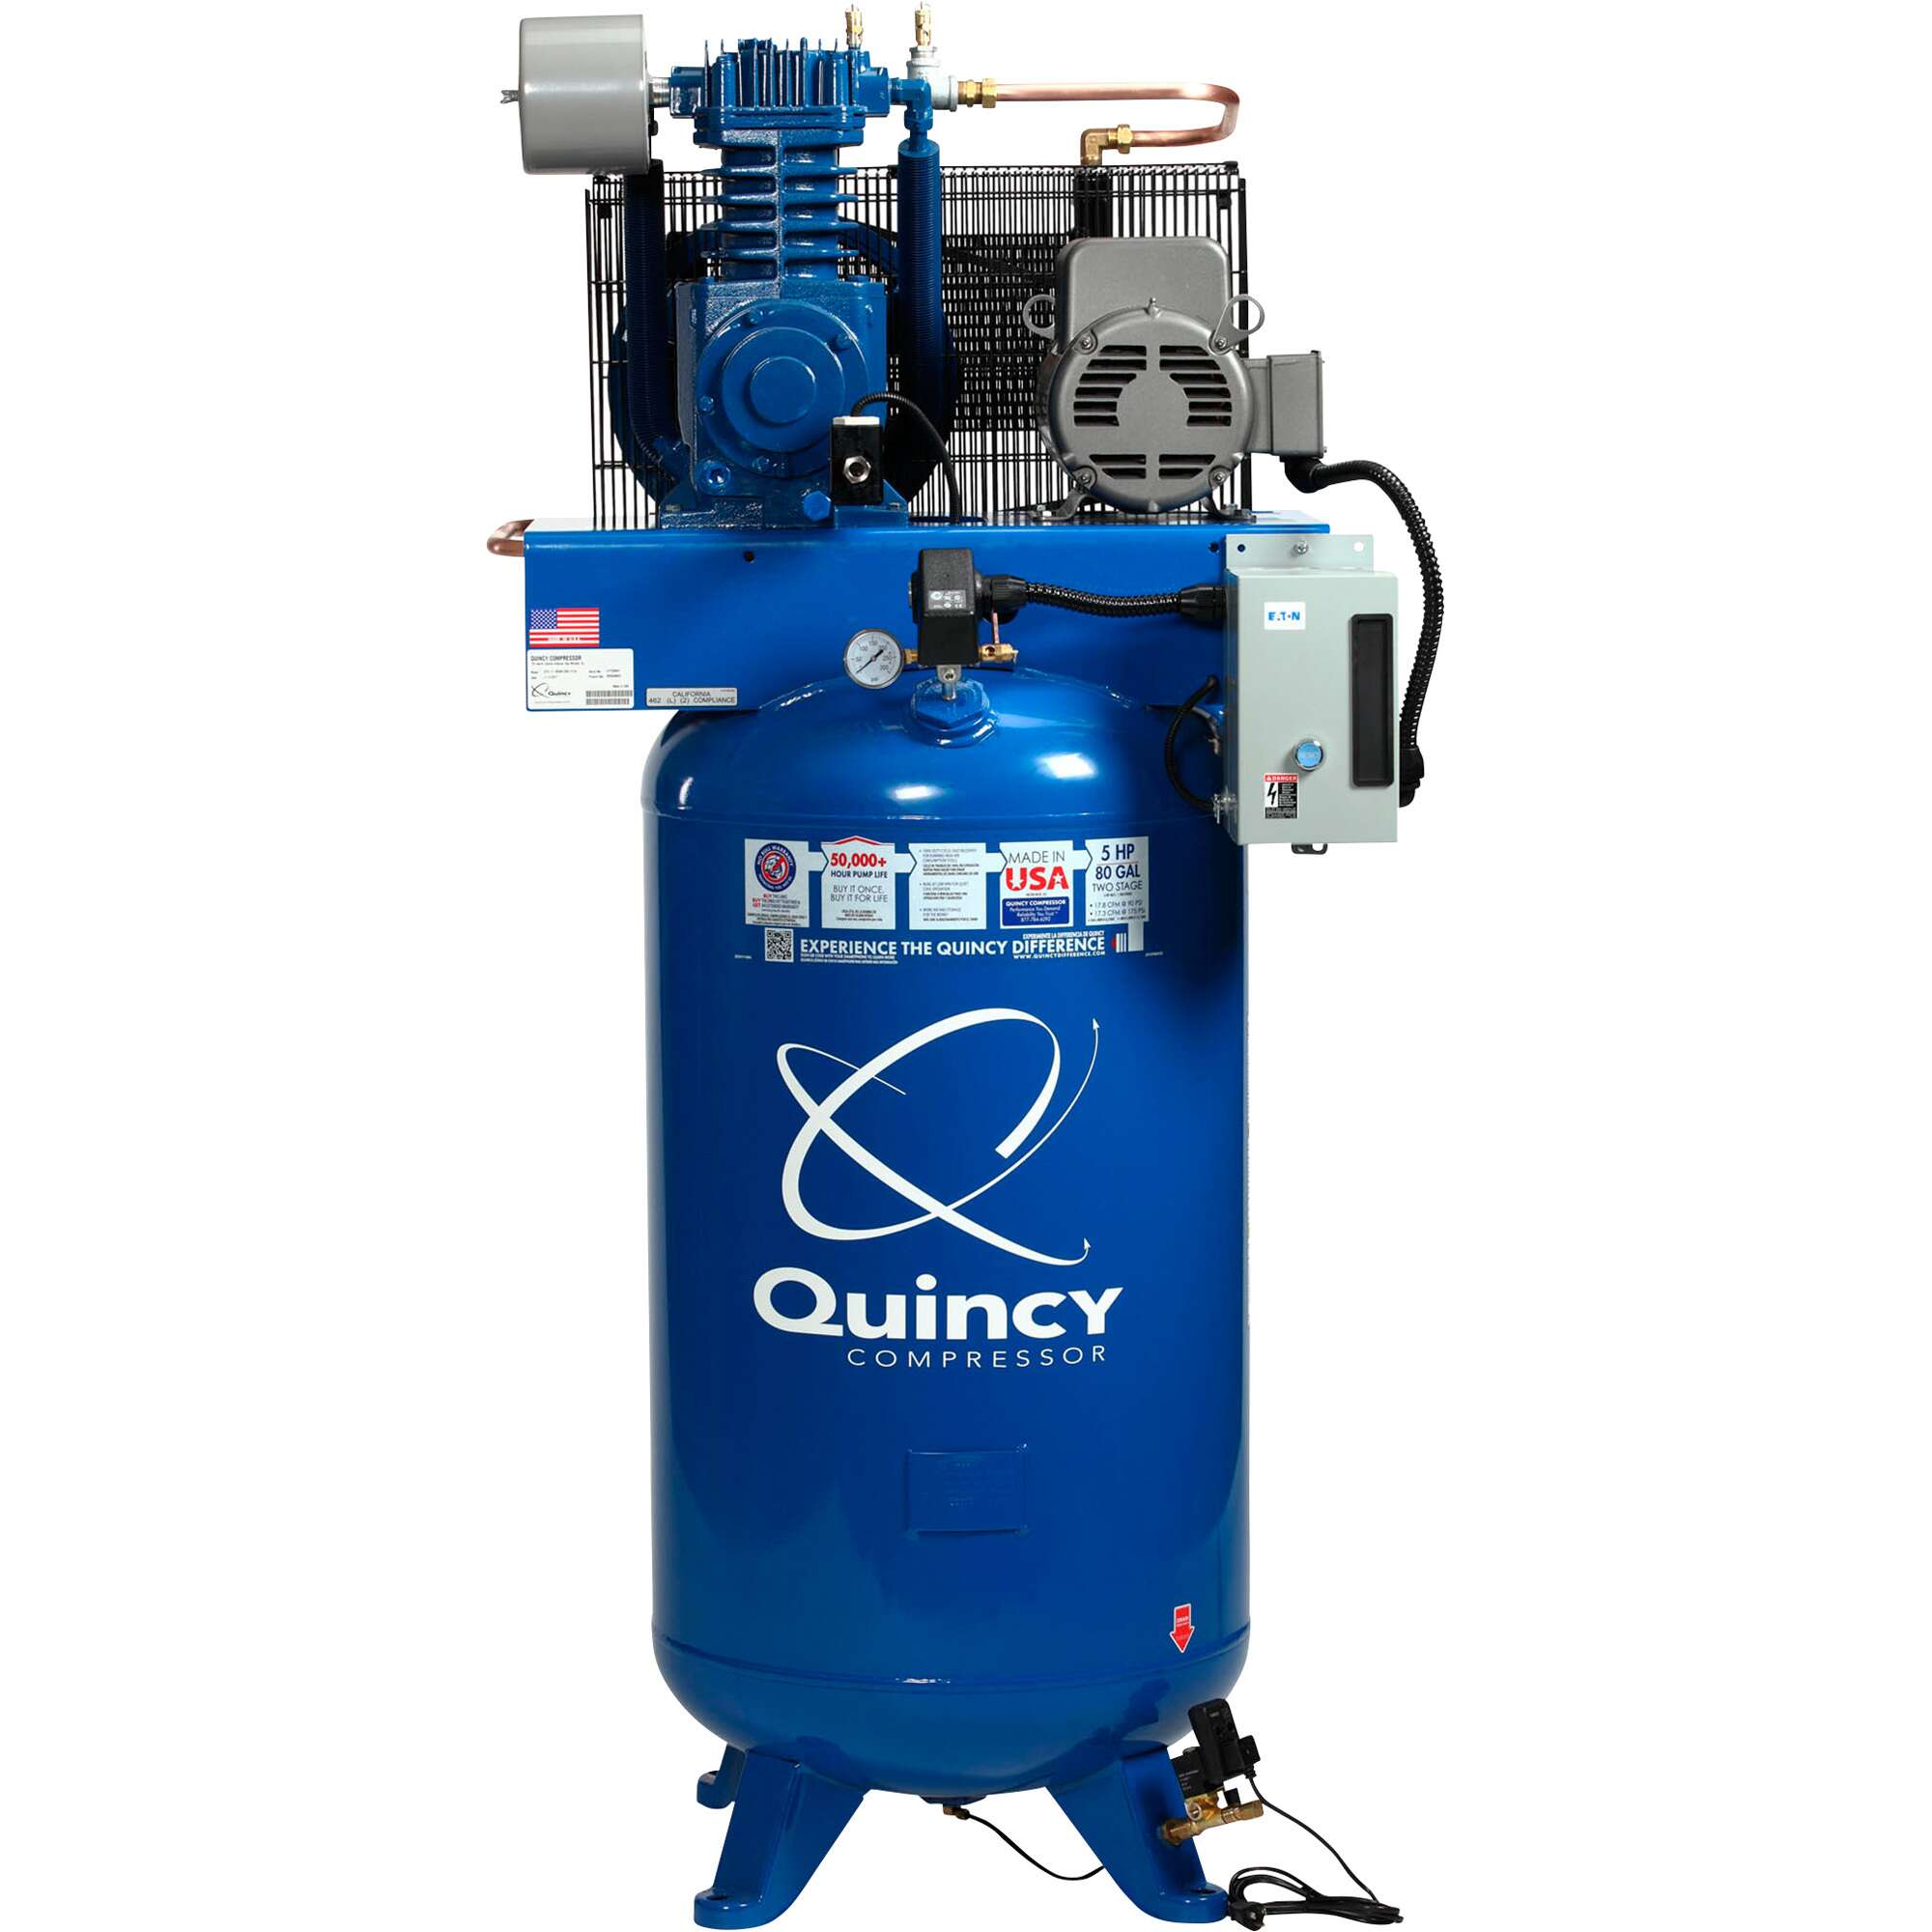 Quincy QT 5 Splash Lubricated Reciprocating Air Compressor with MAX Package 5 HP 460 Volt 3 Phase 80 Gallon Vertical